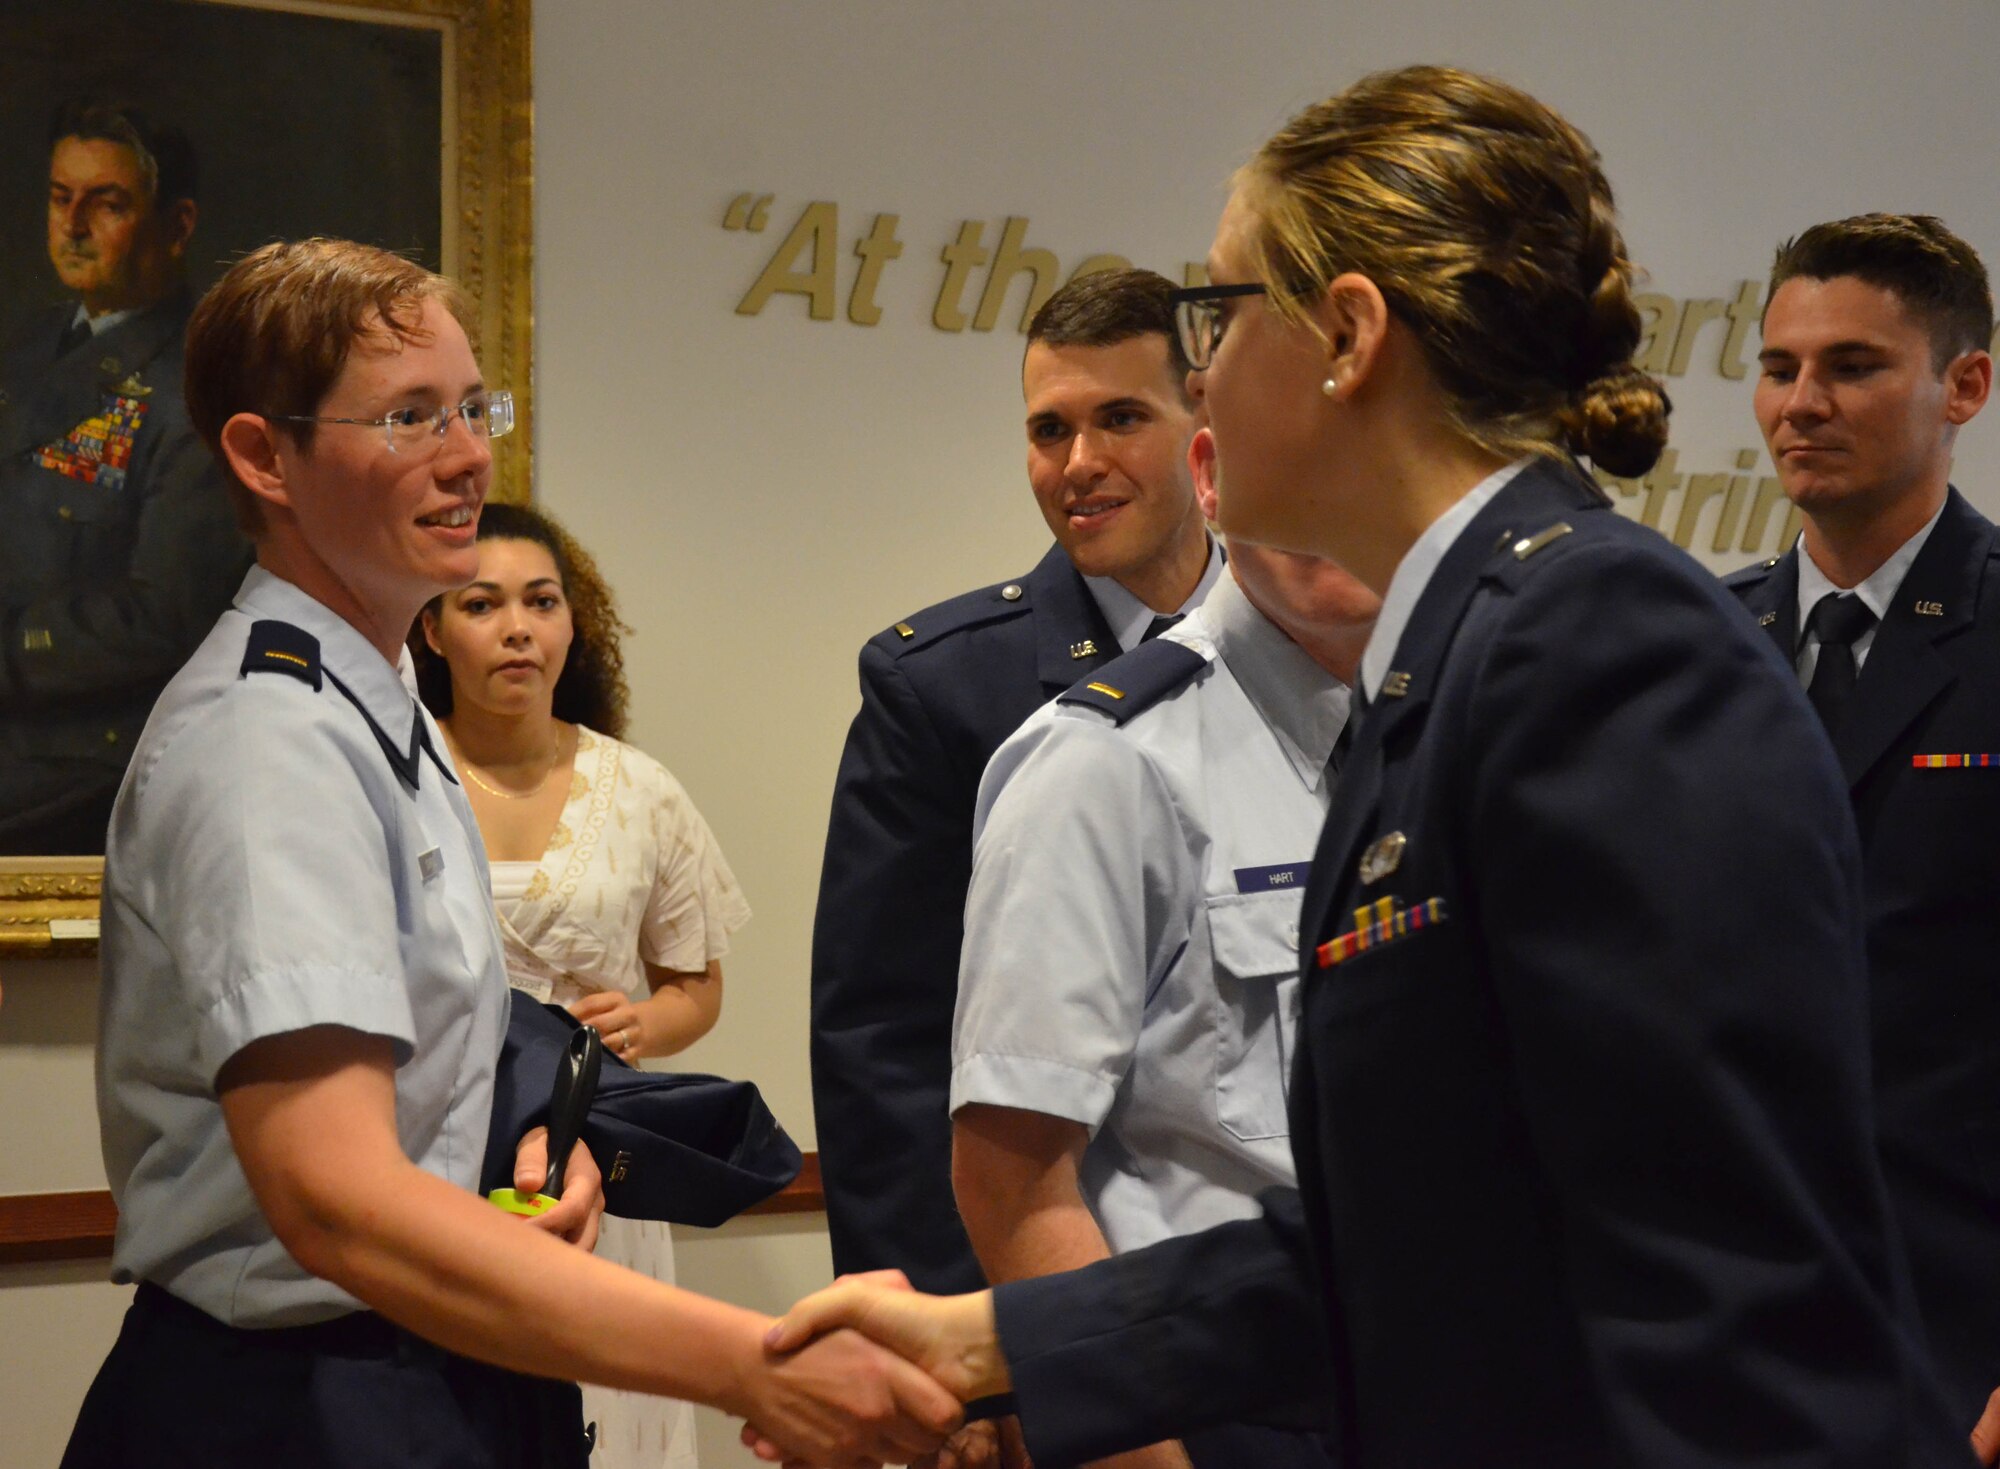 2nd Lt. Cynthia A. Schroll (left) shakes hands with her Officer Training School instructor, 1st Lt. Claire M. Krokker, after Schroll's commissioning ceremony May 30, 2019, as members of her flight look on.  (U.S. Air Force photo by Susan A. Romano)